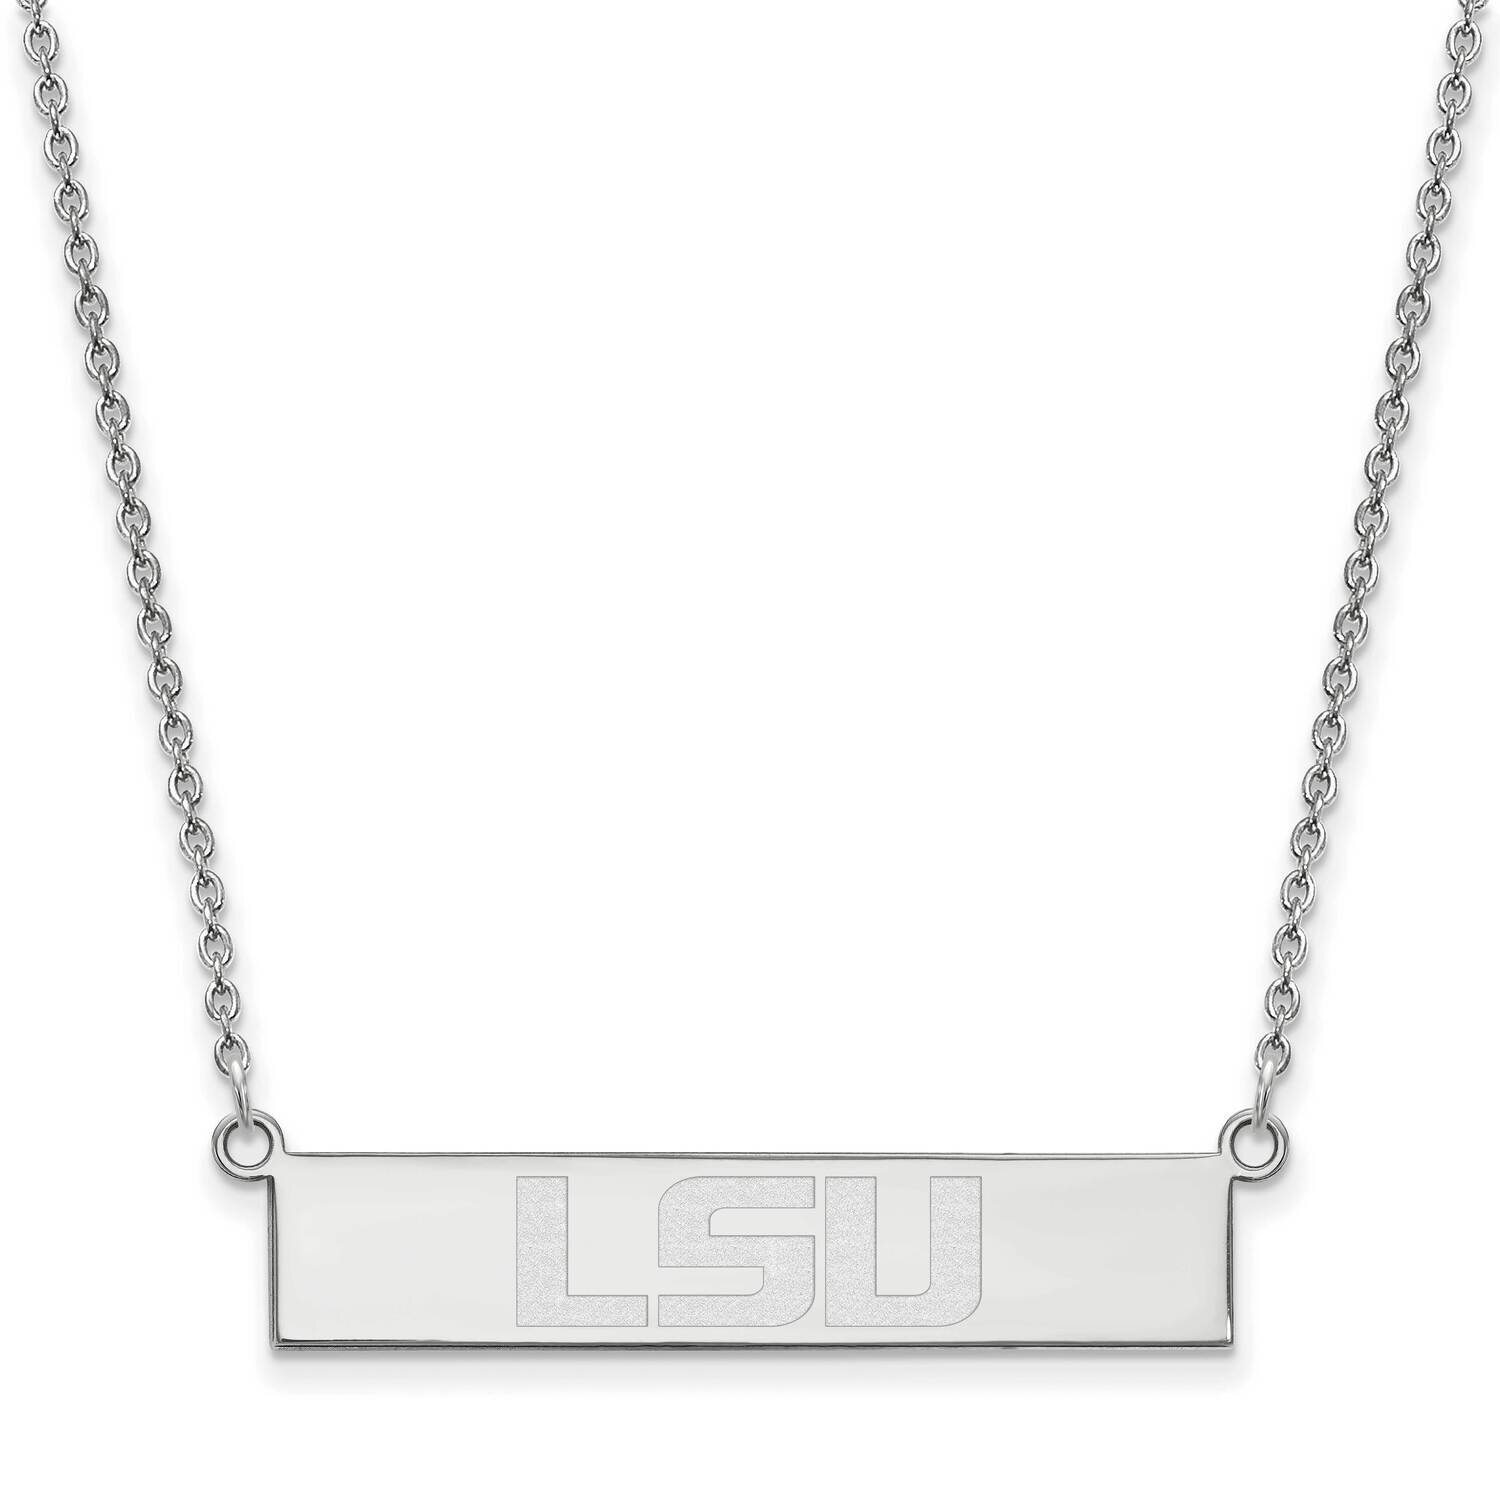 Lsu Small Bar Necklace Sterling Silver Rhodium-plated SS095LSU-18